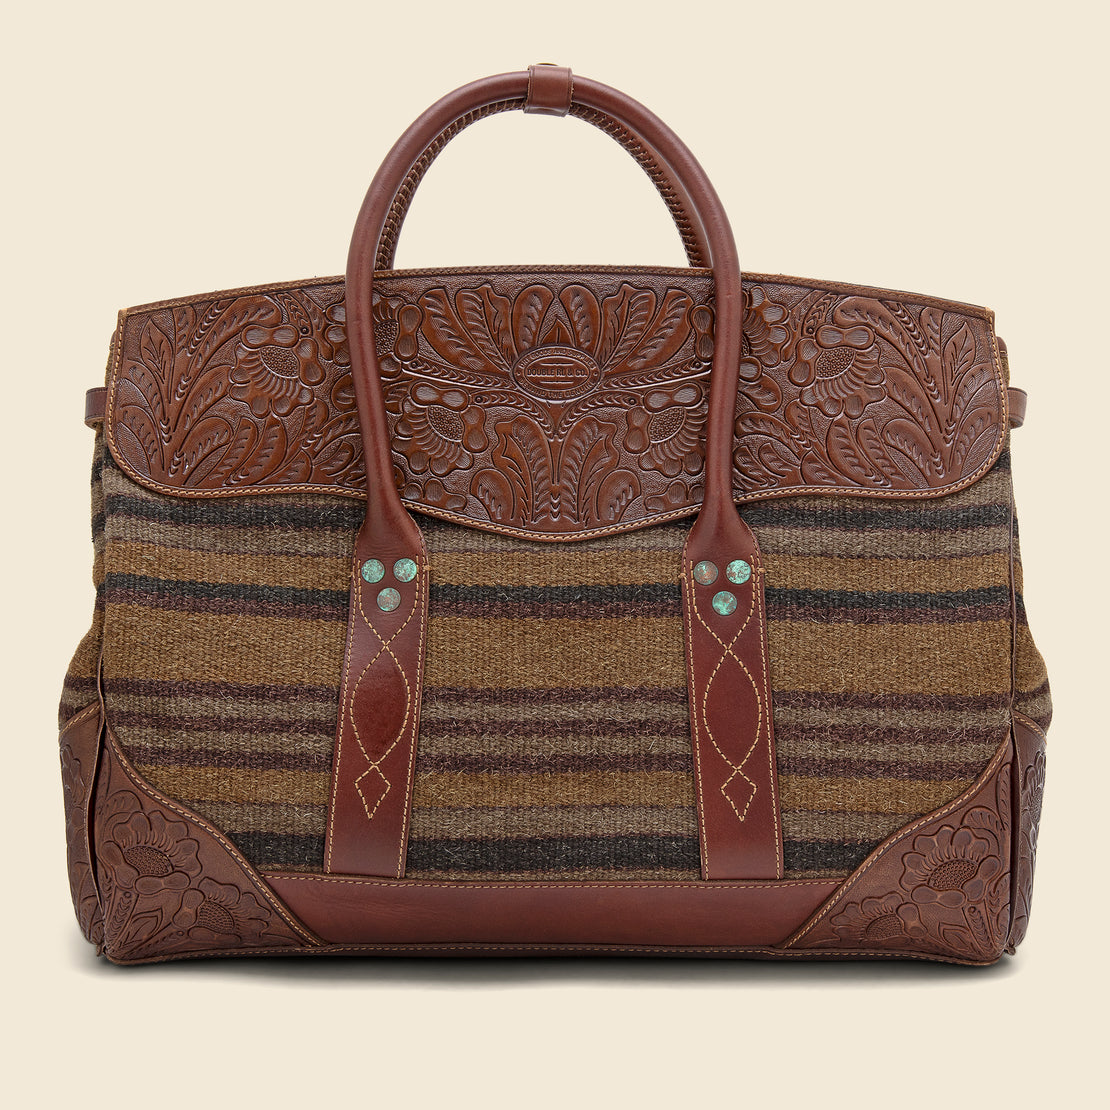 Pecos Blanket Duffle Bag - Grey/Brown/Multi - RRL - STAG Provisions - Accessories - Bags / Luggage